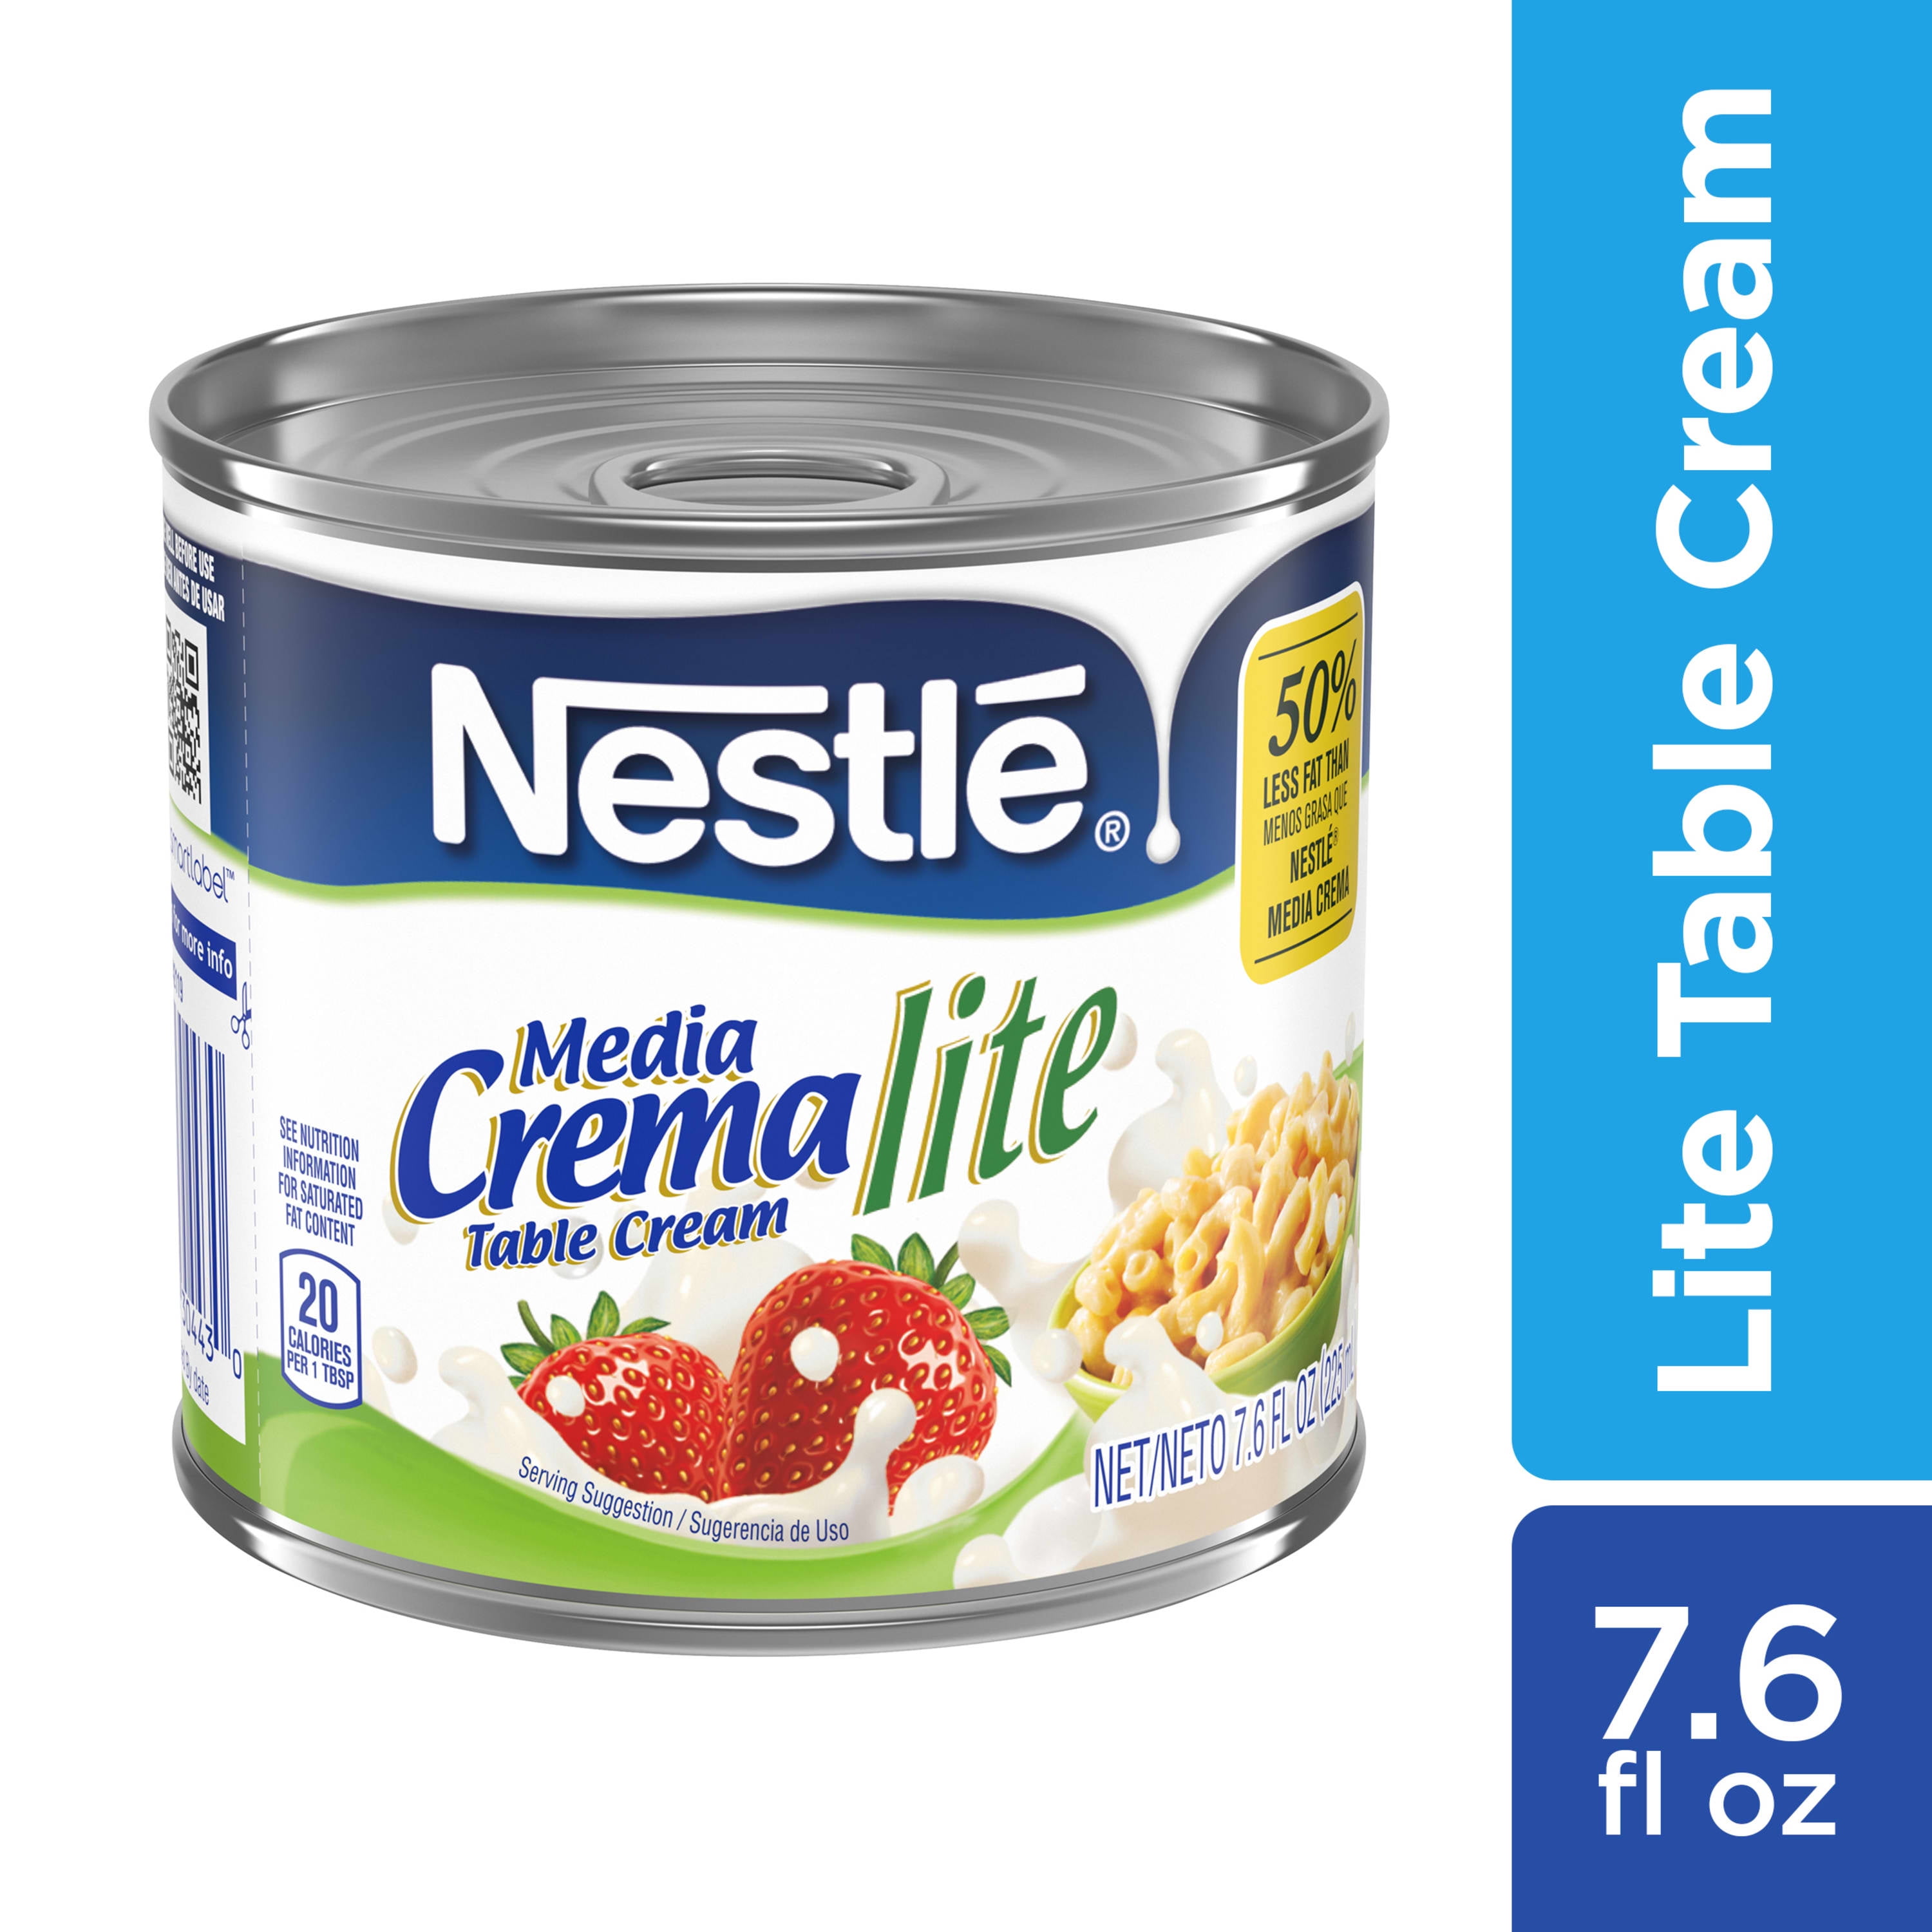 Nestle Media Crema Lite Table Cream Ideal For Making Sweet And Savory Recipes, 7.6 oz